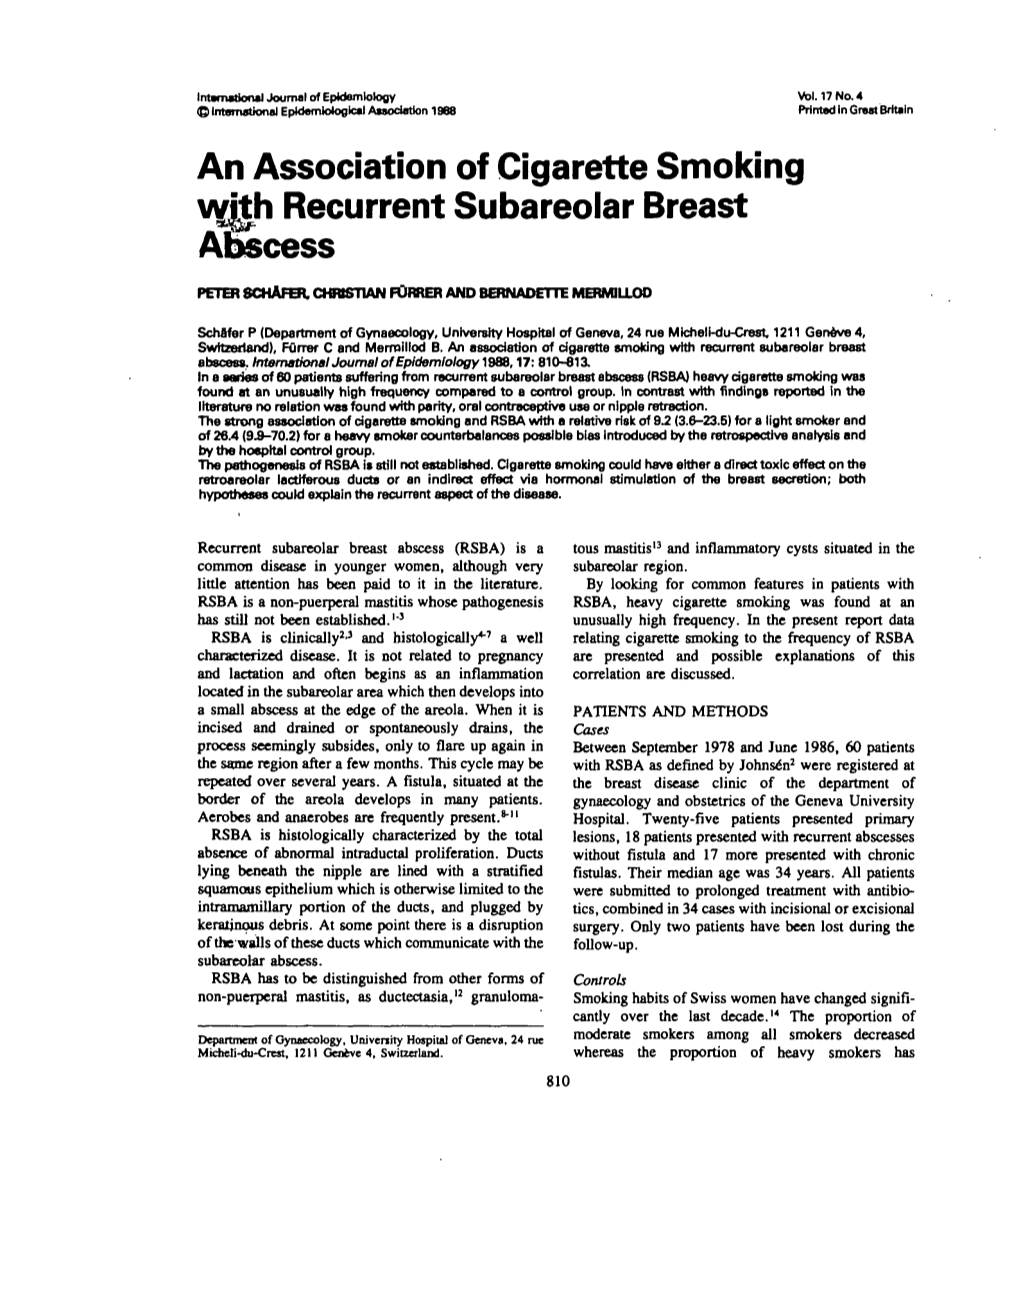 An Association of Cigarette Smoking with Recurrent Subareolar Breast Abscess